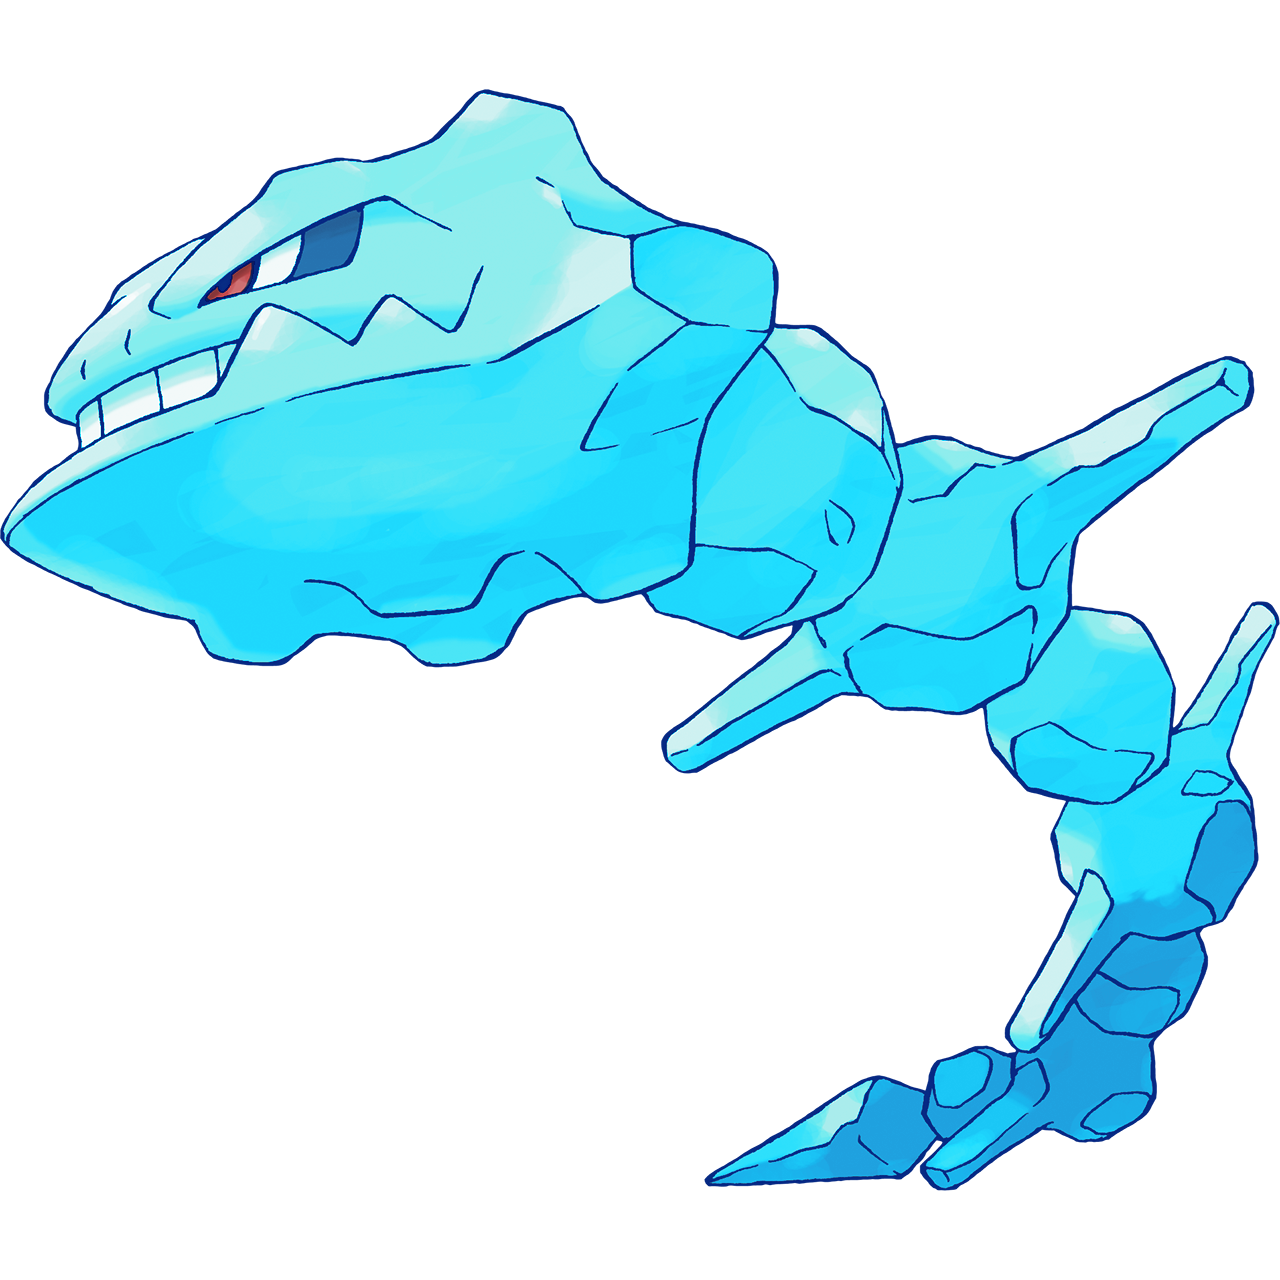 Thoughts on the Crystal Onix by ChipmunkRaccoonOz on DeviantArt